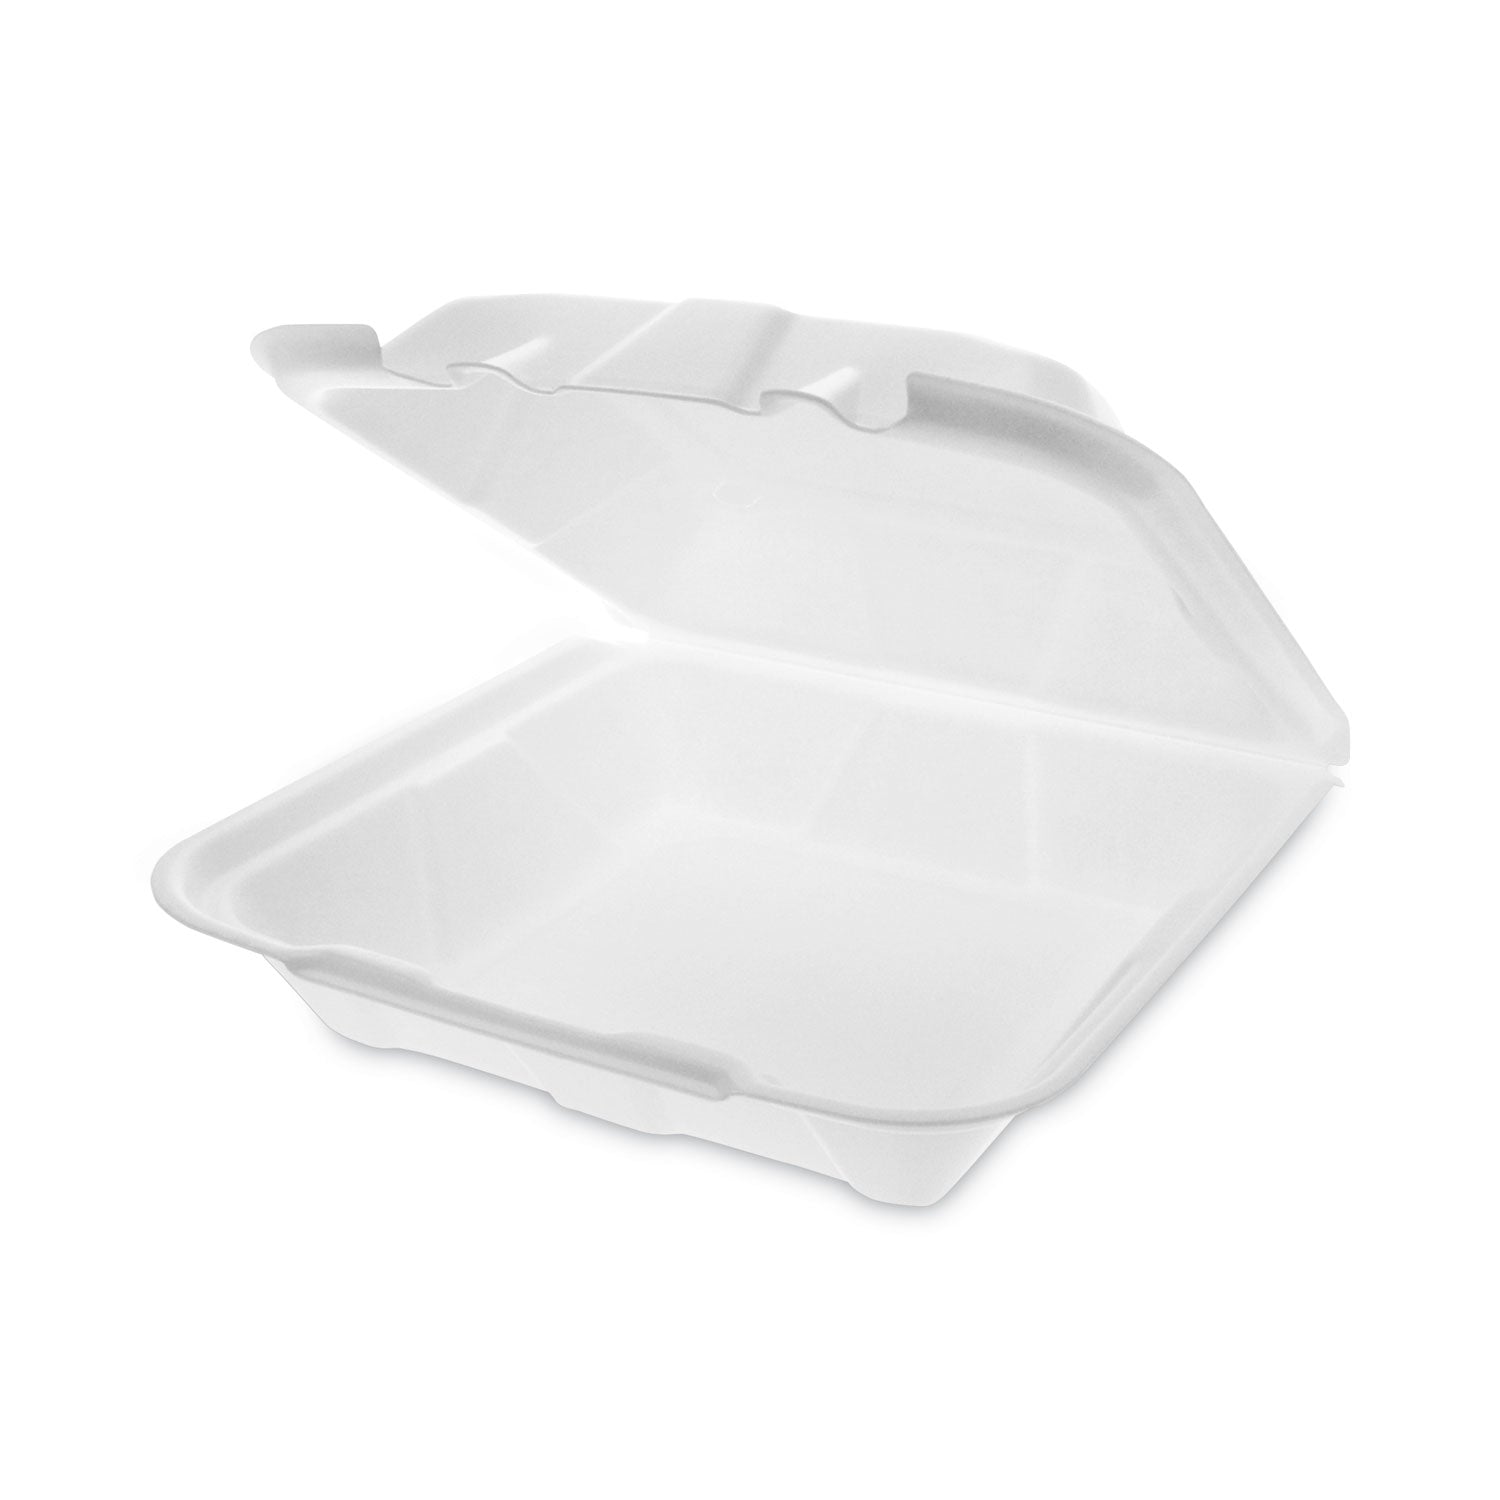 vented-foam-hinged-lid-container-dual-tab-lock-economy-913-x-9-x-325-white-150-carton_pctytd19901econ - 2